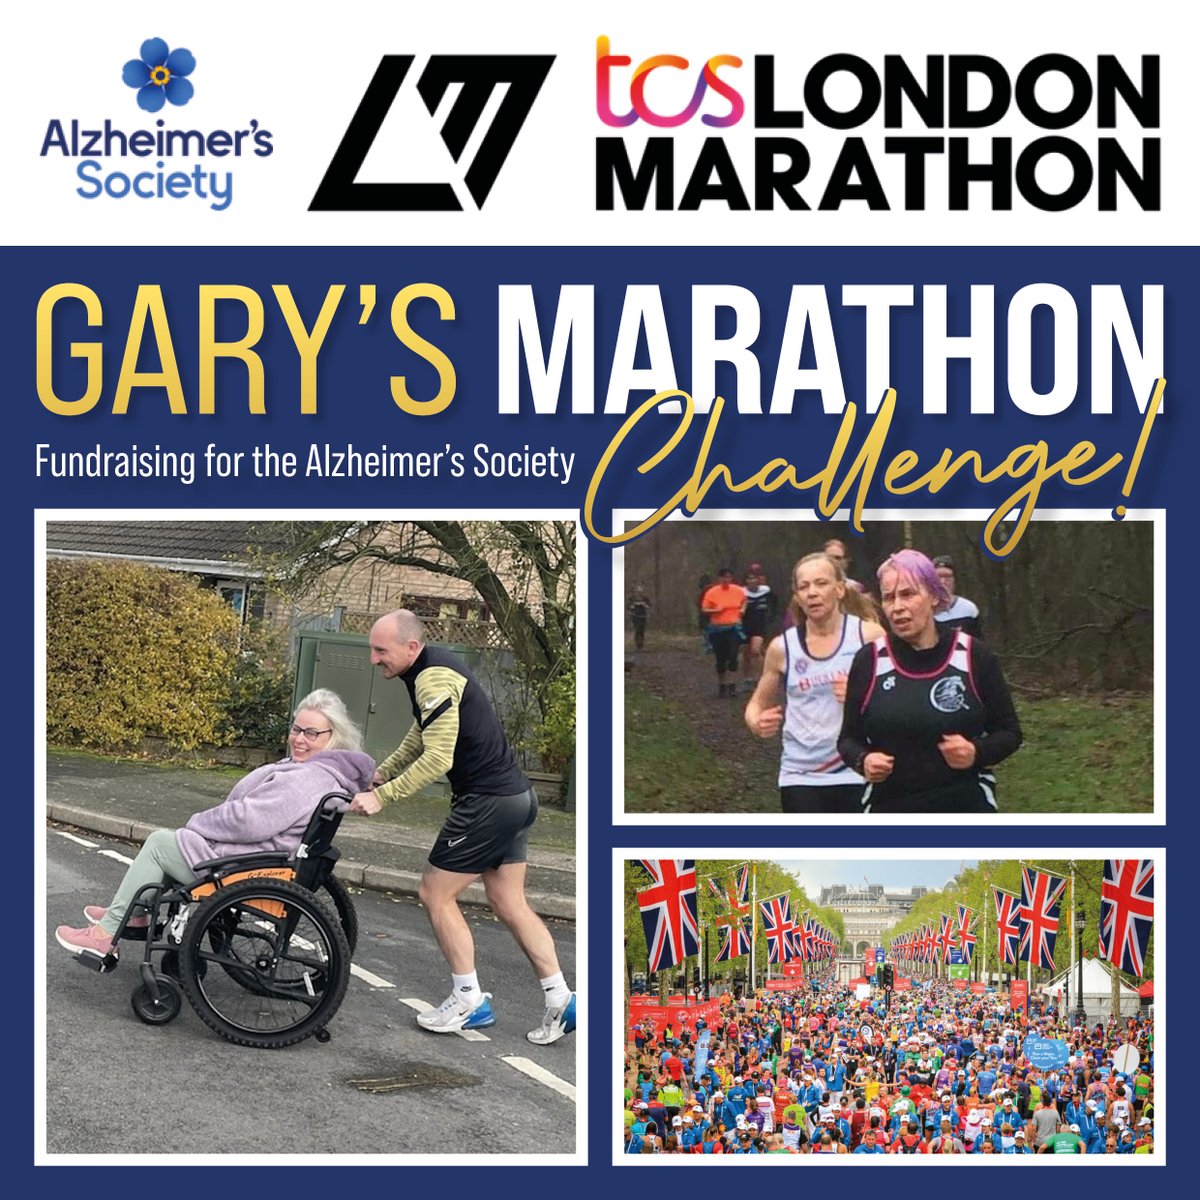 This weekend PET-Xi’s Gary Drake will be joining thousands of #runners at @LondonMarathon fundraising for @alzheimerssoc. Gary will be pushing his step mum in her wheelchair for the 26.2-mile course! Full story: justgiving.com/page/gary-drak… @Drakey17 #dementia #Fundraising